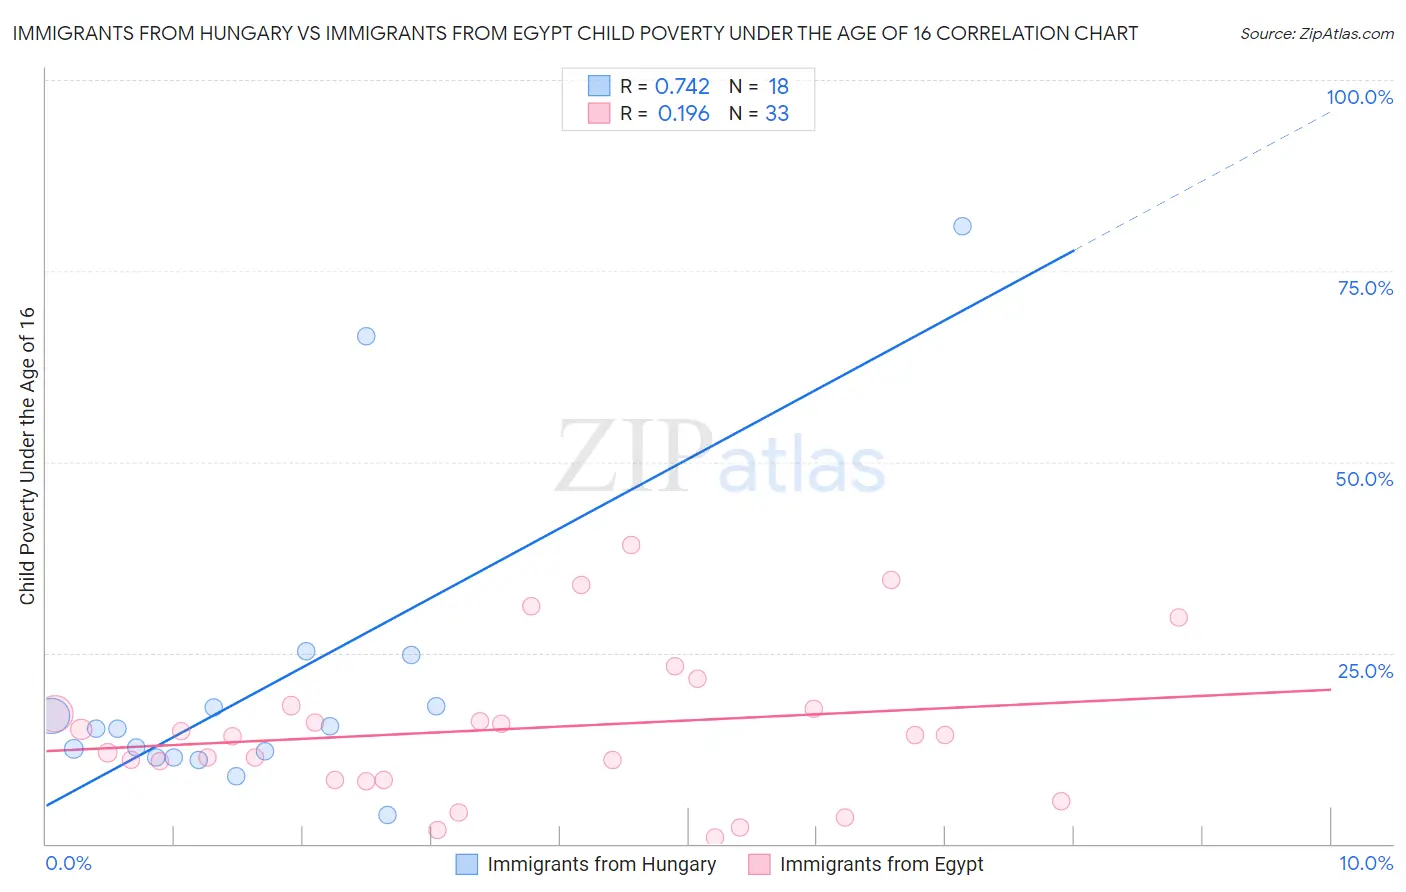 Immigrants from Hungary vs Immigrants from Egypt Child Poverty Under the Age of 16